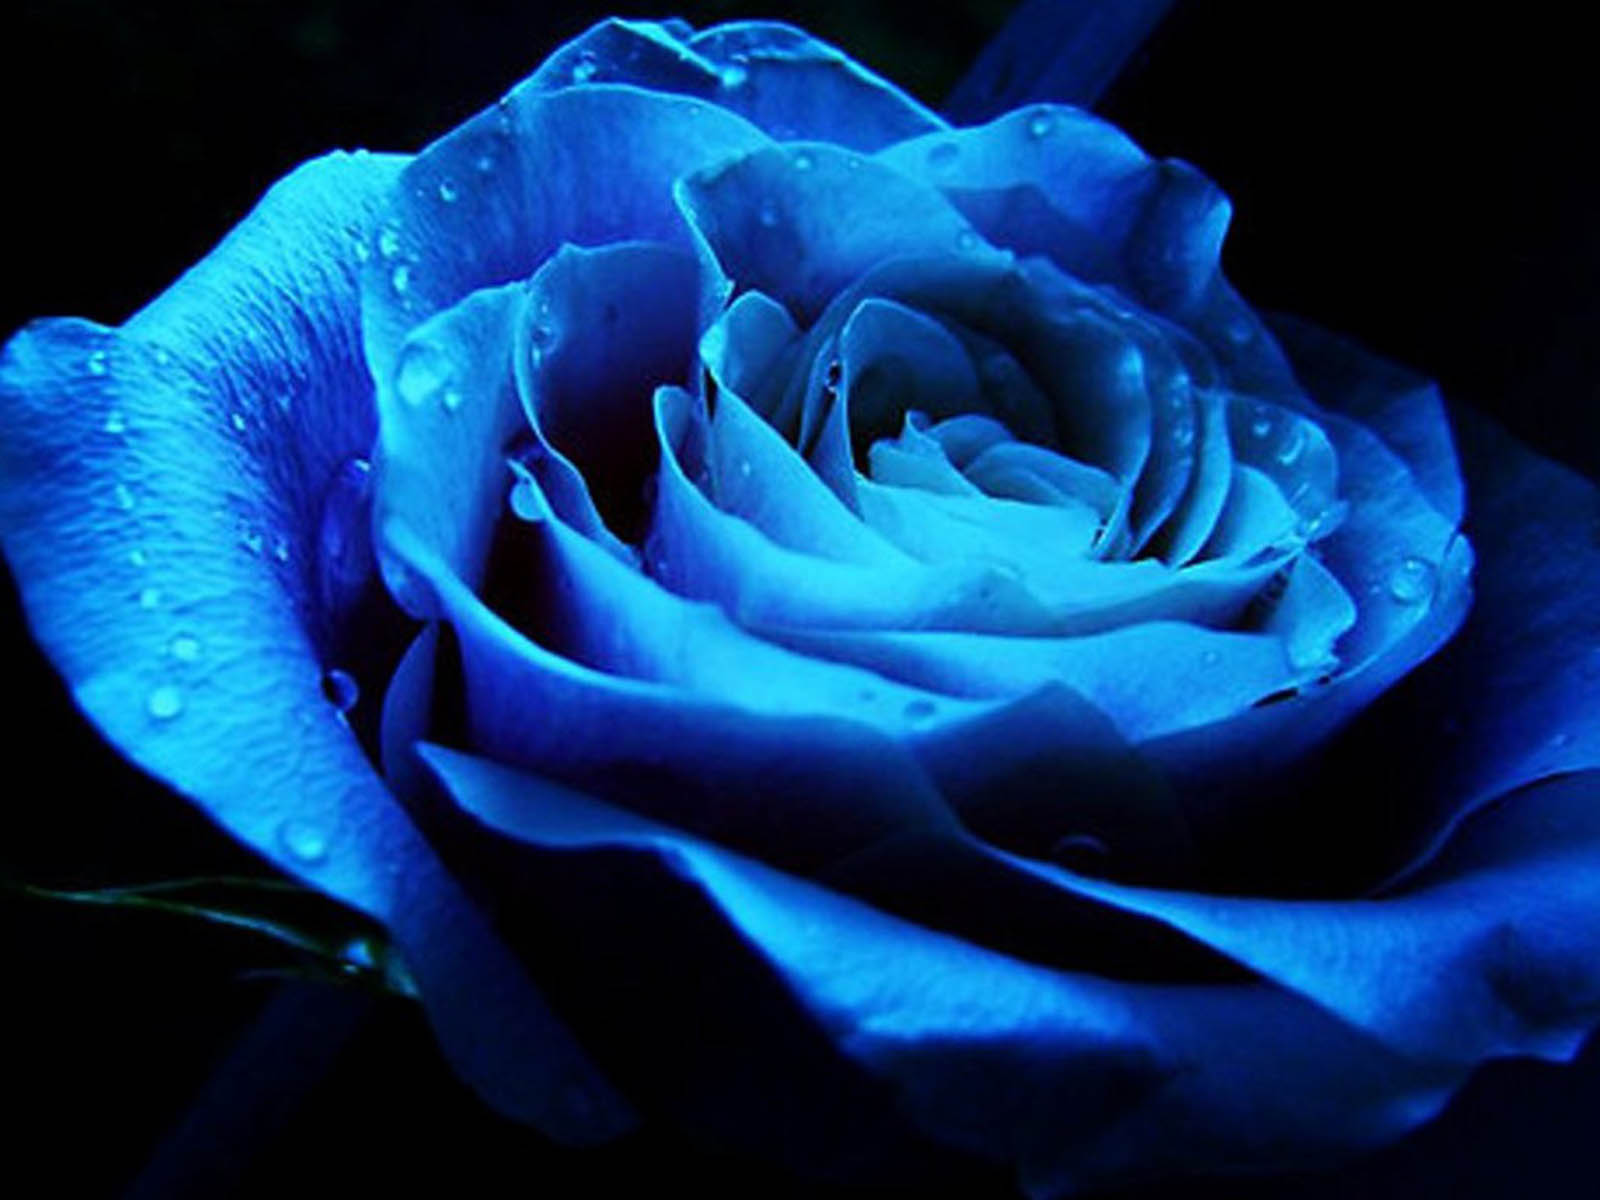  wallpapers  Blue Rose  Wallpapers 